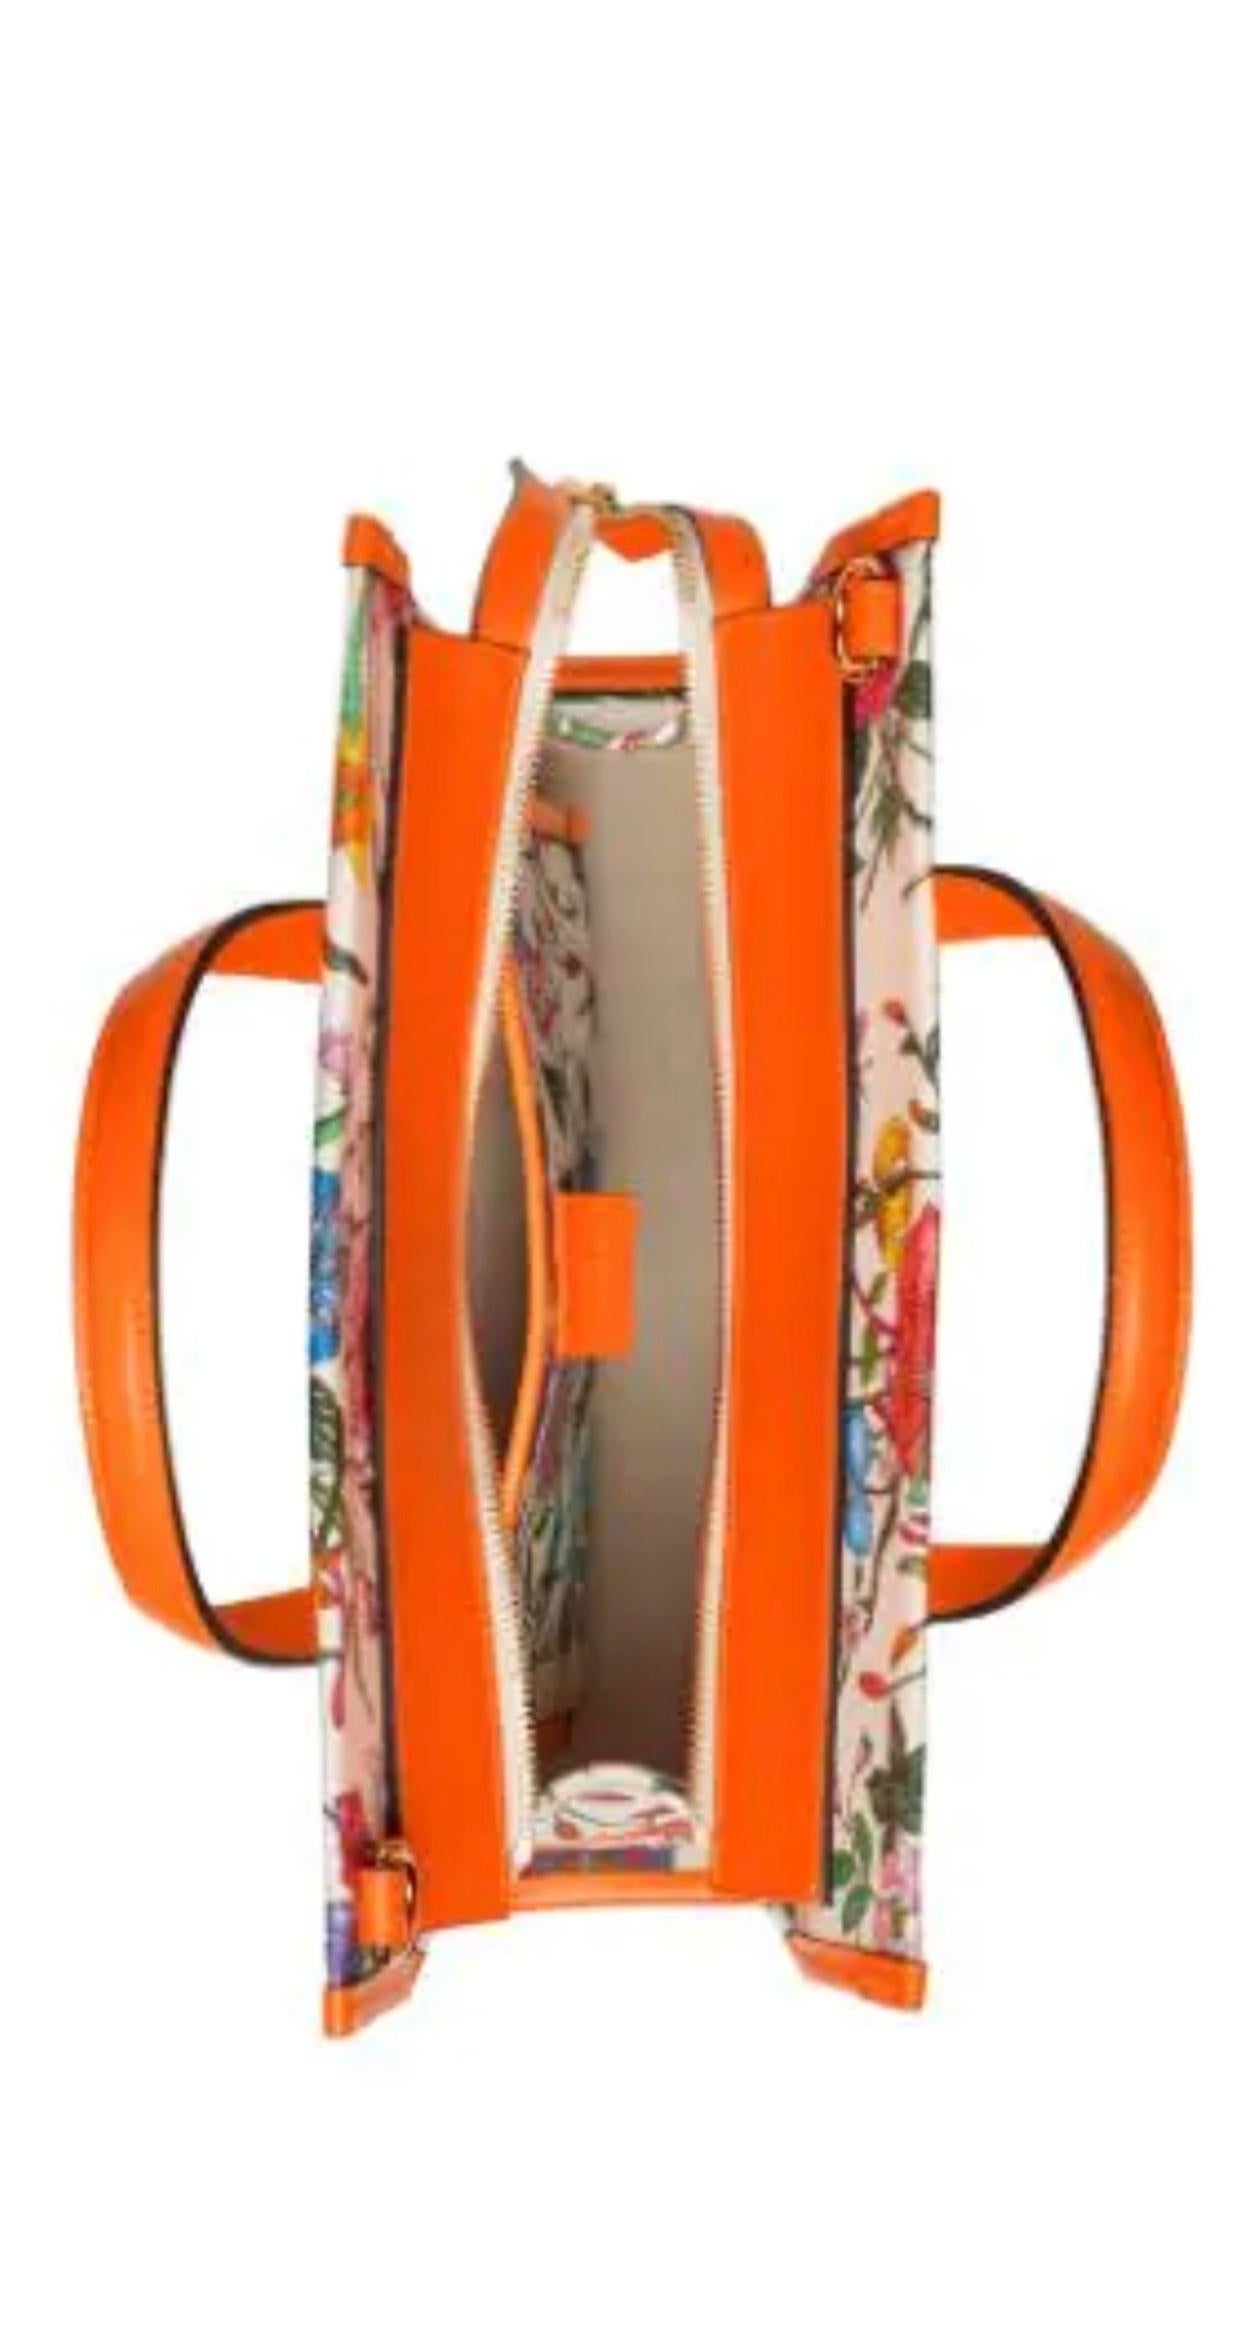 Flora medium leather-trimmed printed canvas tote
Latest and Hot 
Brand new Gucci Flora medium sized handbag. With an off white canvas with a bright colorful floral pattern. The tote features neon orange leather at the base, trim, and top handles and